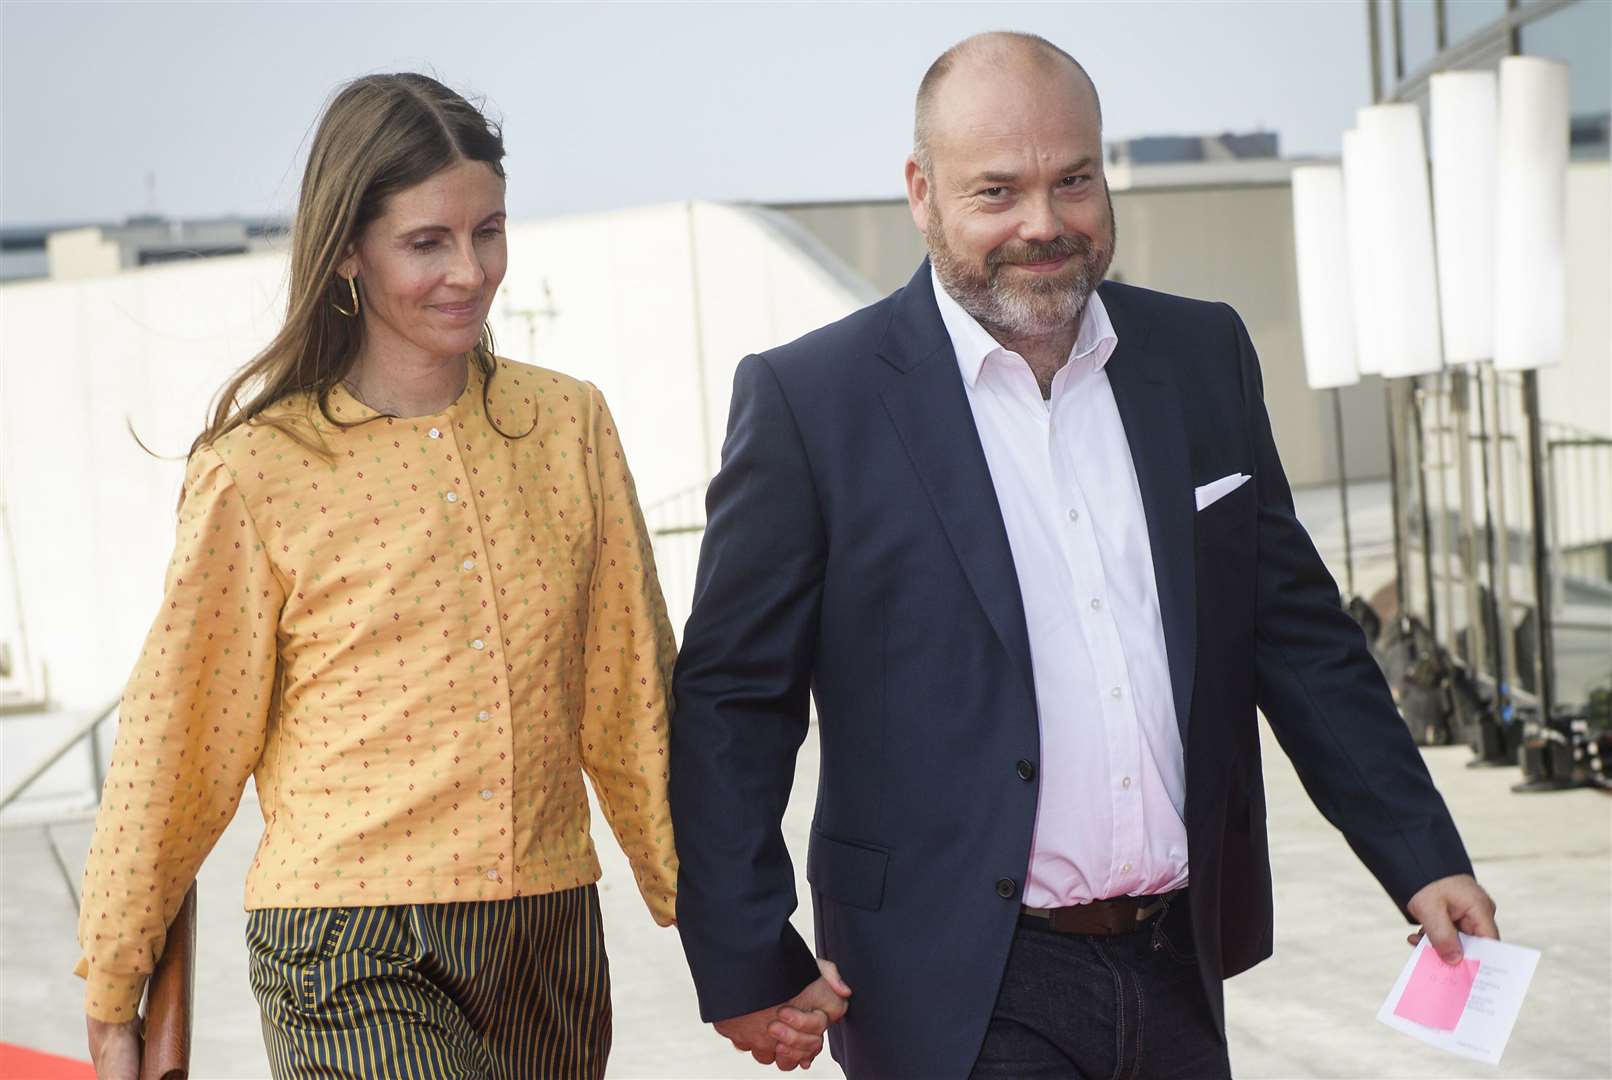 FILE - In this May 27, 2018 file photo, Bestseller CEO Anders Holch Povlsen and his wife Anne Holch Povlsen arrive for the 50th birthday celebrations for Denmark's Crown Prince Frederik in Royal Arena in Copenhagen, Denmark. Danish media is saying three of the four children of Danish business tycoon, Anders Holch Povlsen, who is allegedly the Nordic country's richest man and a major private landowner in Britain have died in the Sri Lanka bombings on Sunday April 21, 2019. (Olufson Jonas/Ritzau Scanpix via AP, File)